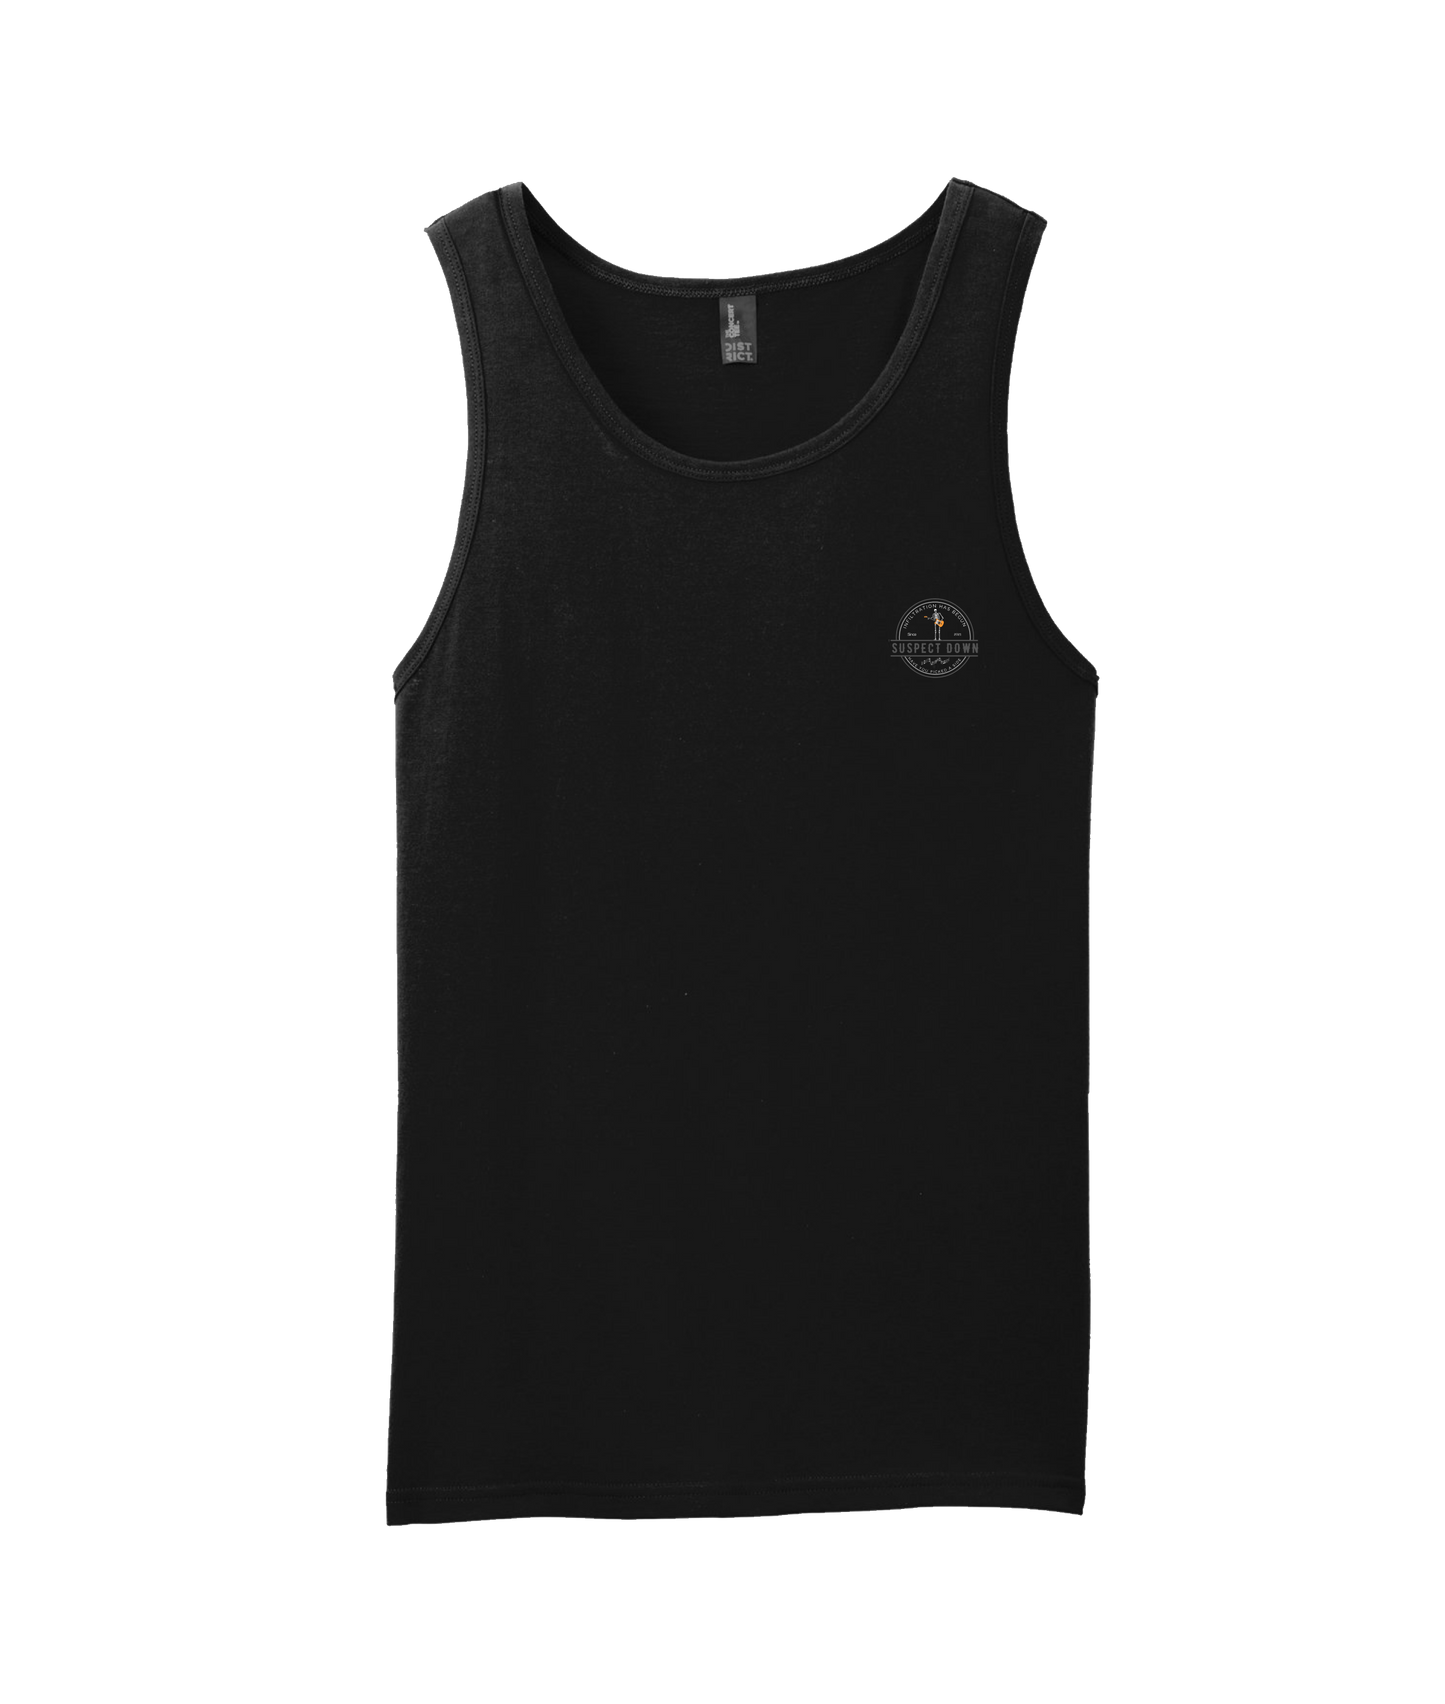 Suspect Down - INFILTRATION - Black Tank Top